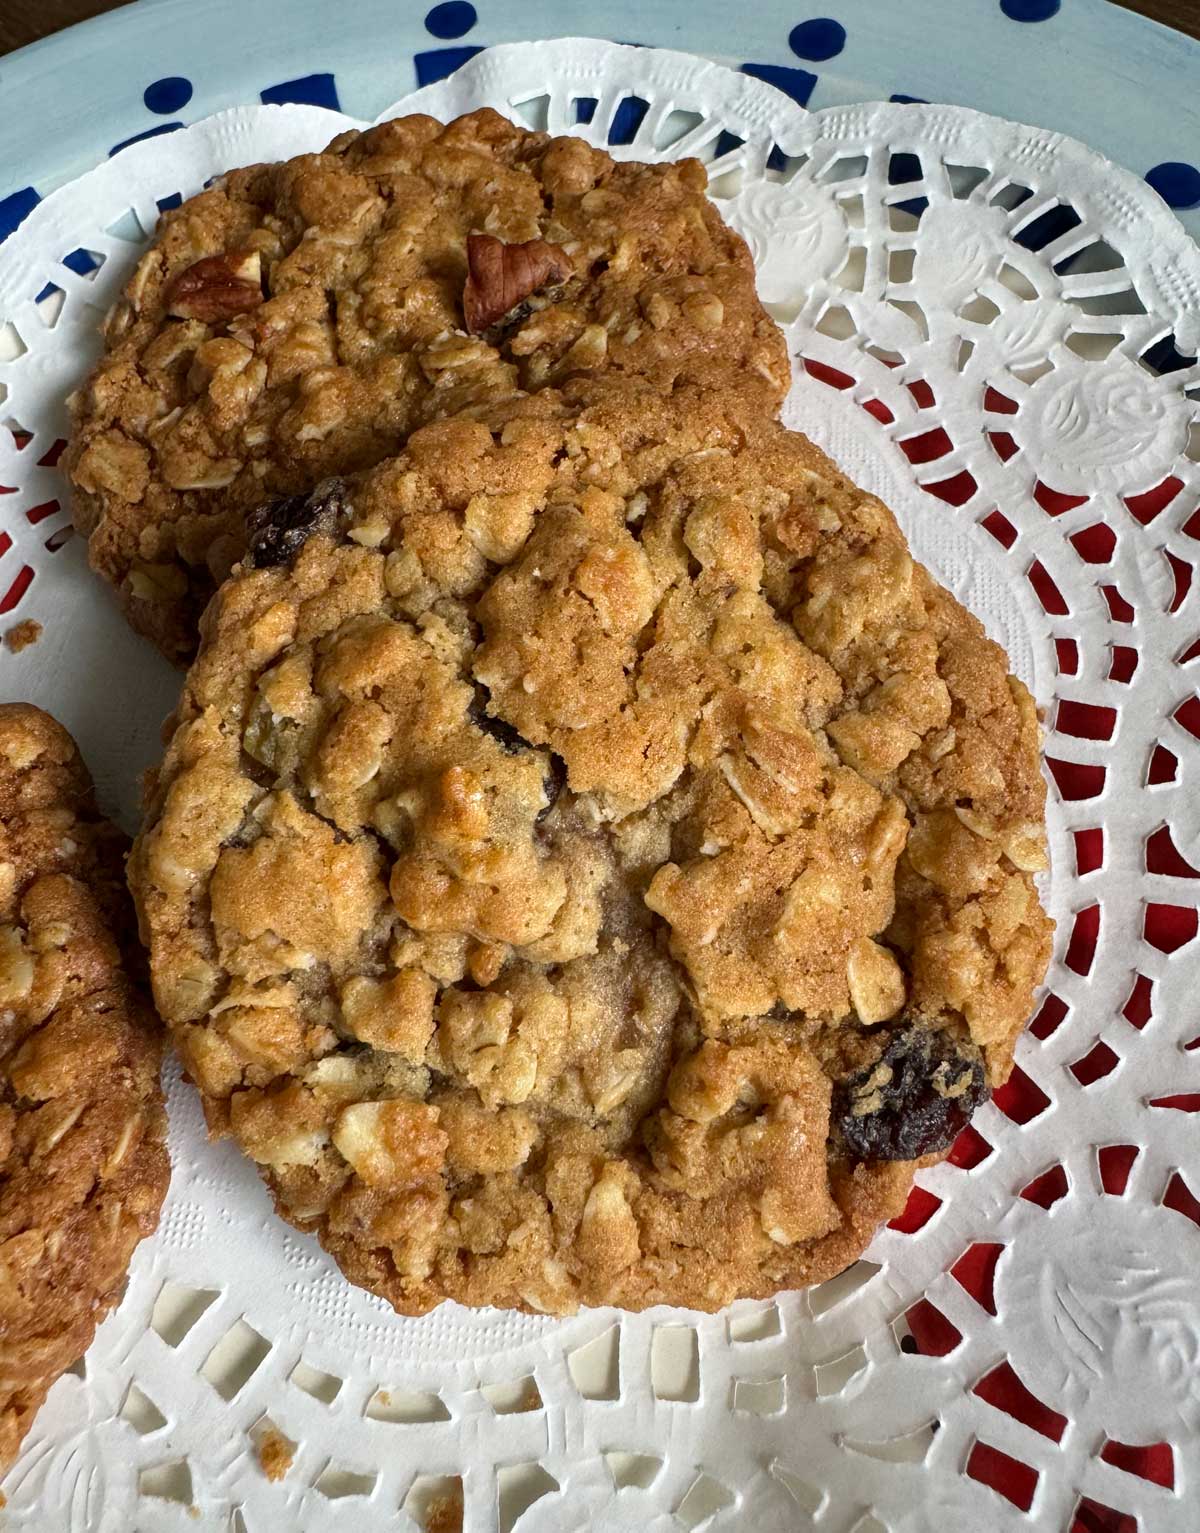 Quaker's Best Oatmeal Cookies for National Oatmeal Cookie Day